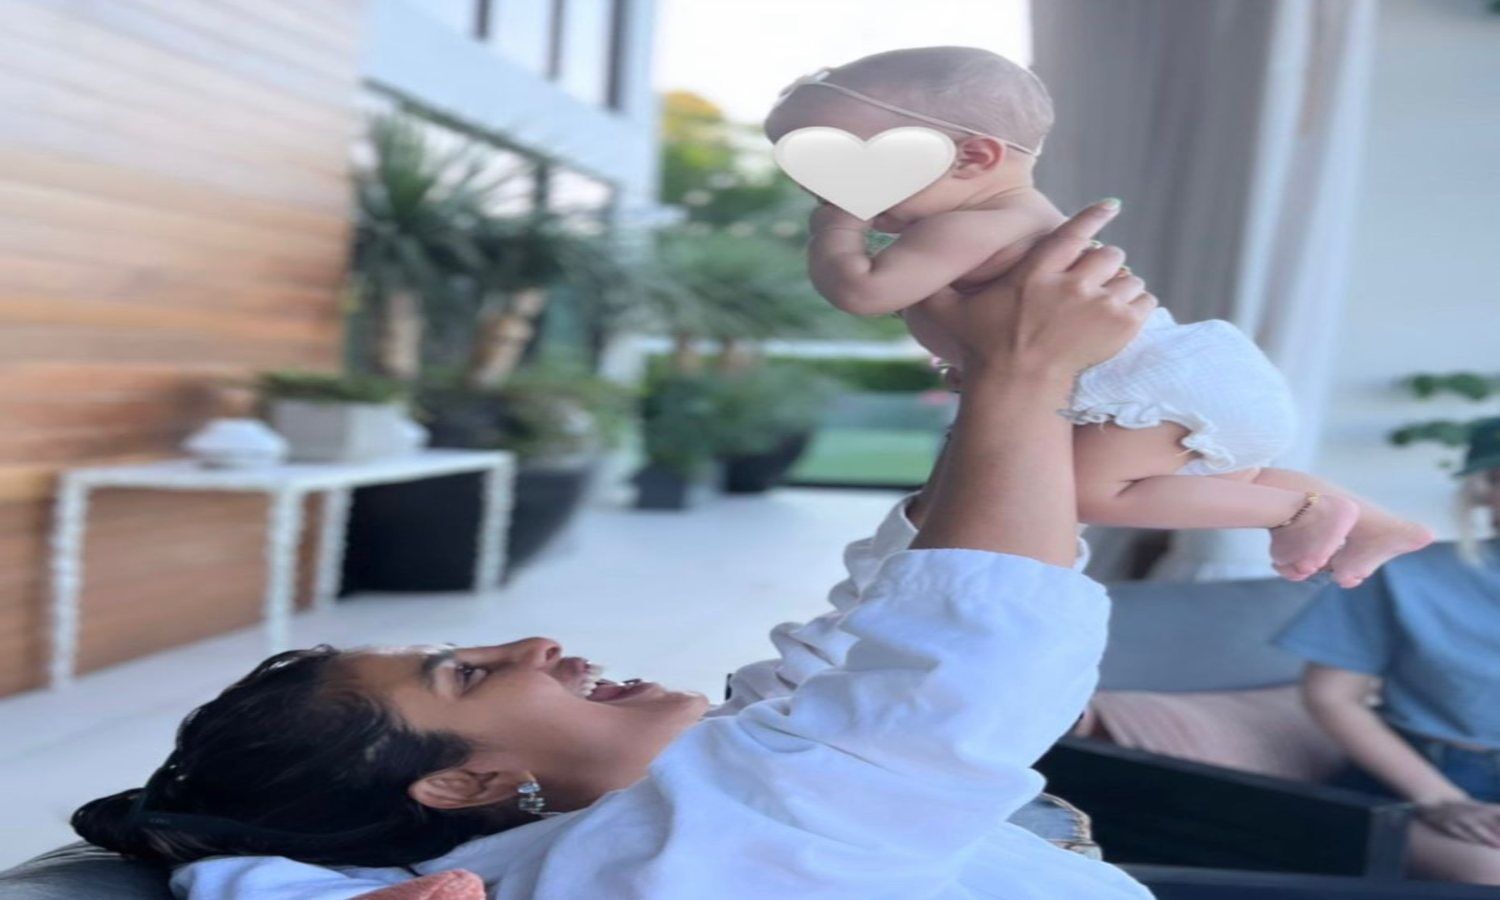 Priyanka Chopra shared a very cute picture of her daughter Maltie Marie, said ‘You are everything to me’